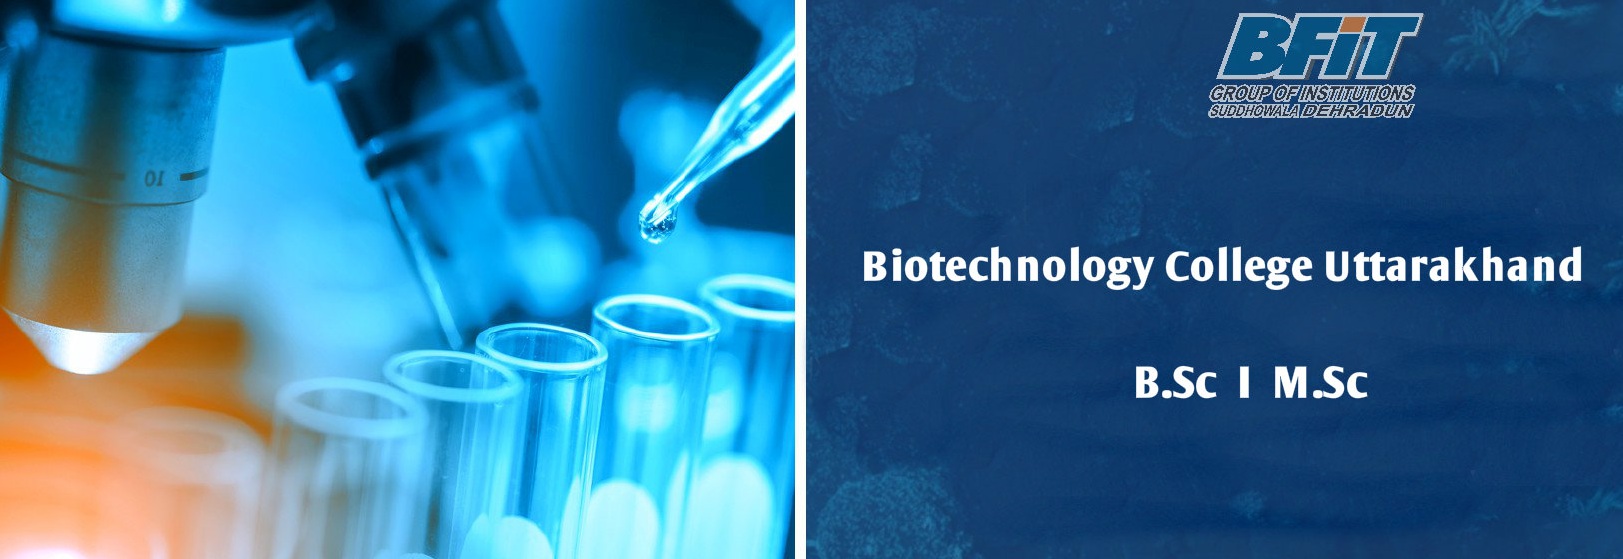 Biotechnology An Ideal Course To Explore Multiple Career Options